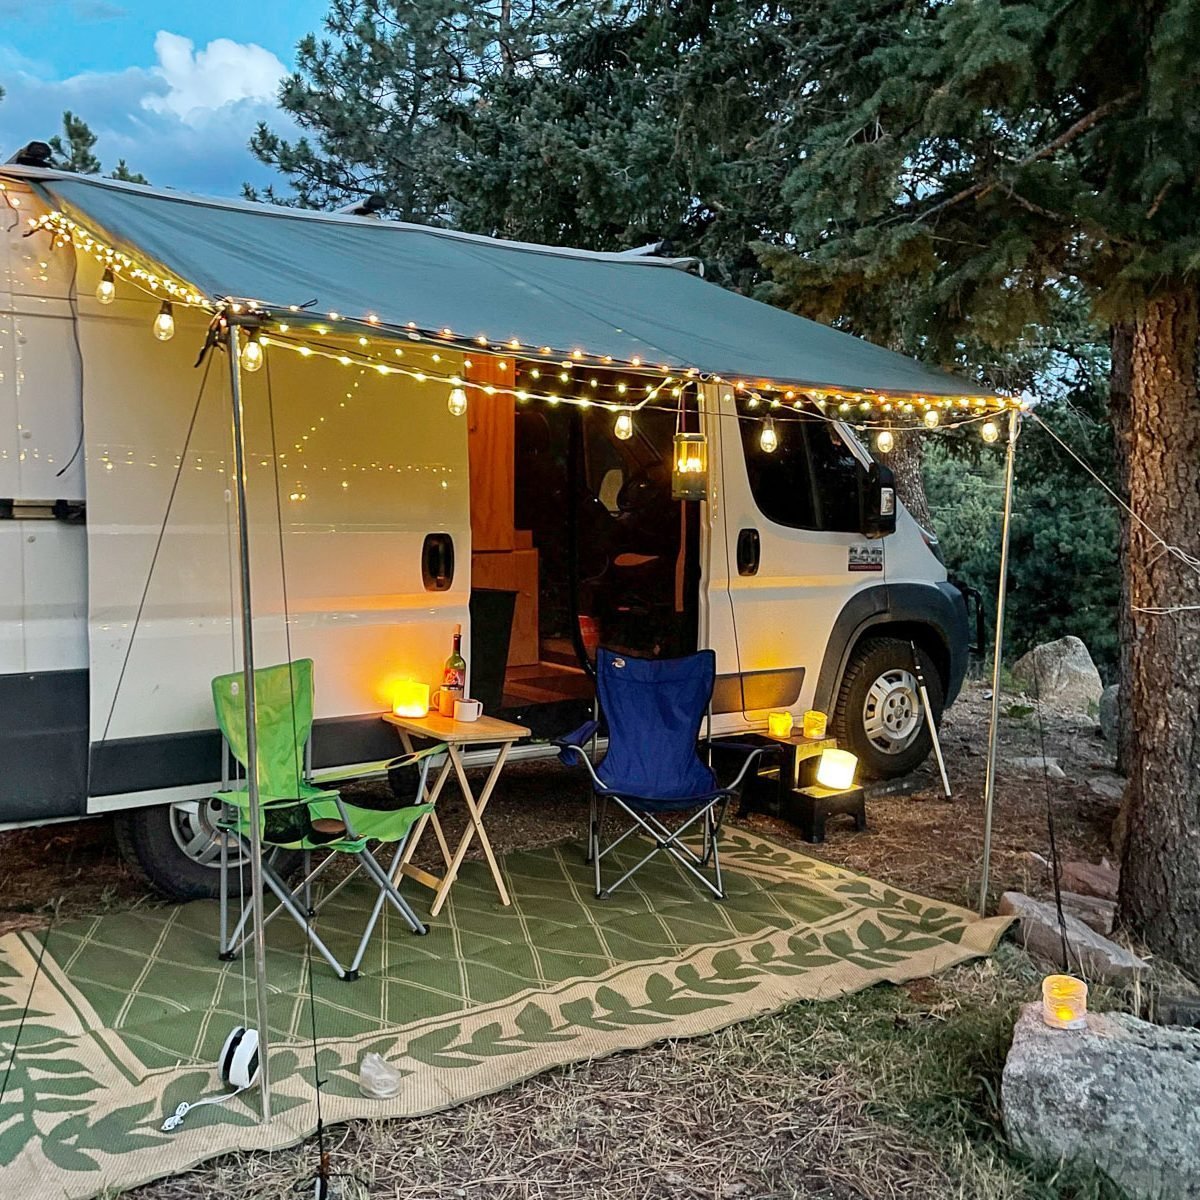 Camping Tent Lighting Ideas  Tent glamping, Camping lights